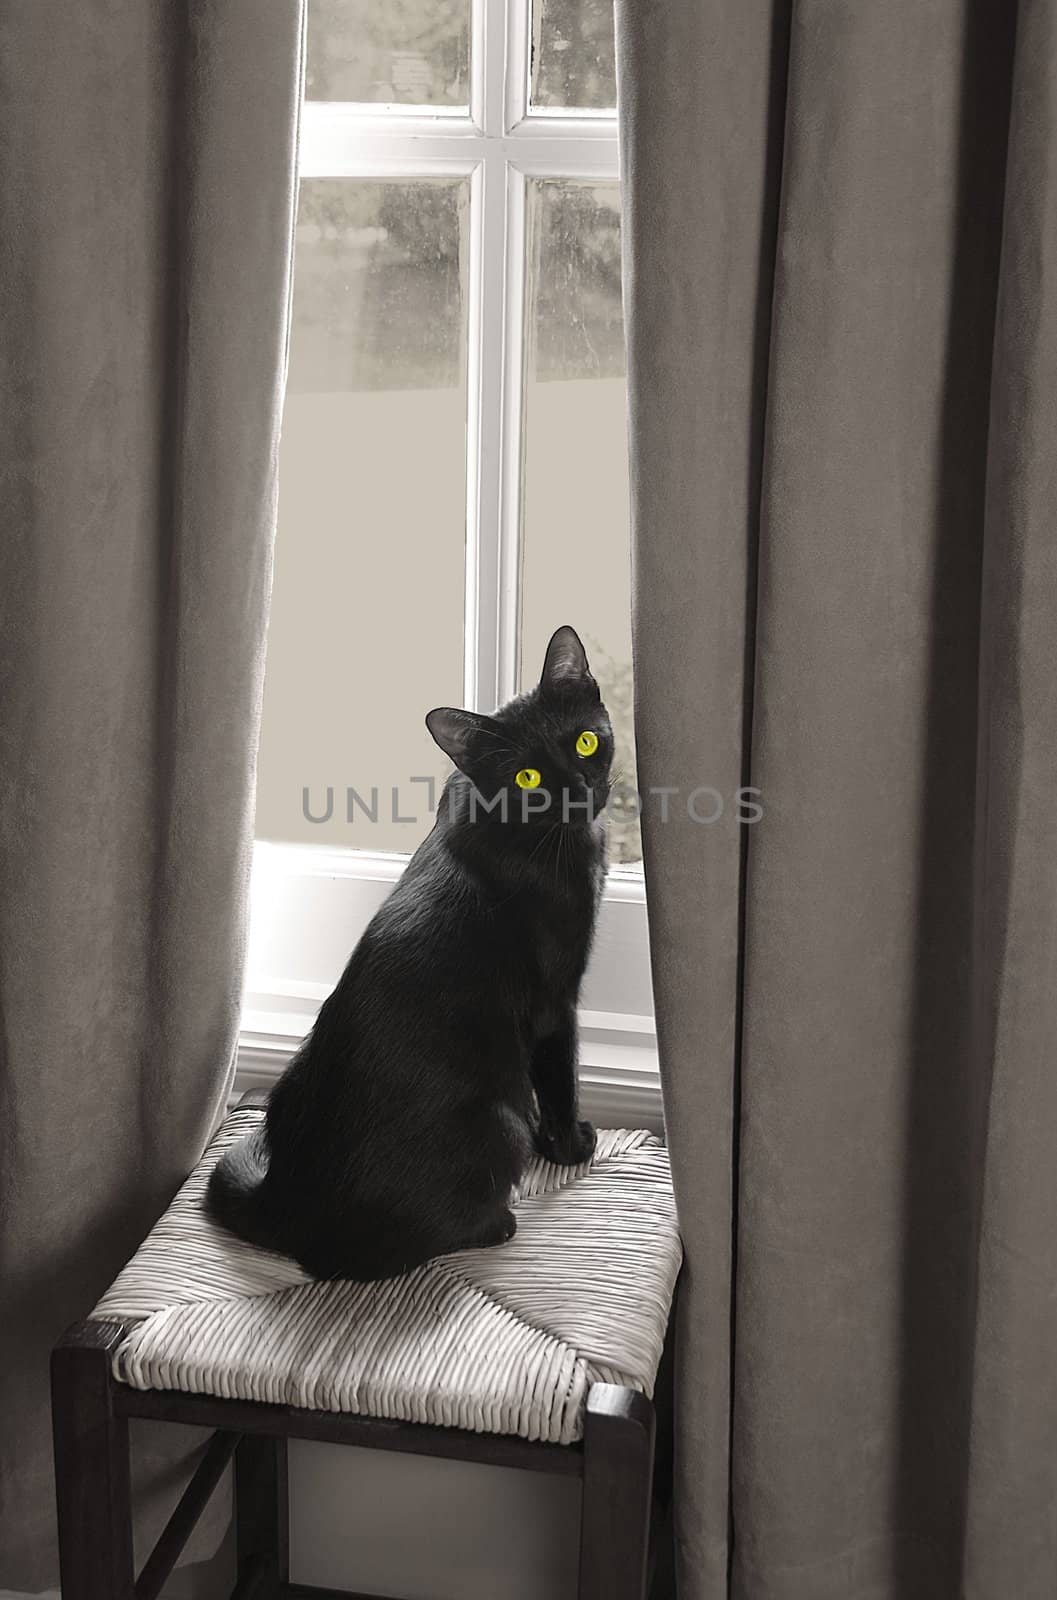 Black cat with green eyes in front of window